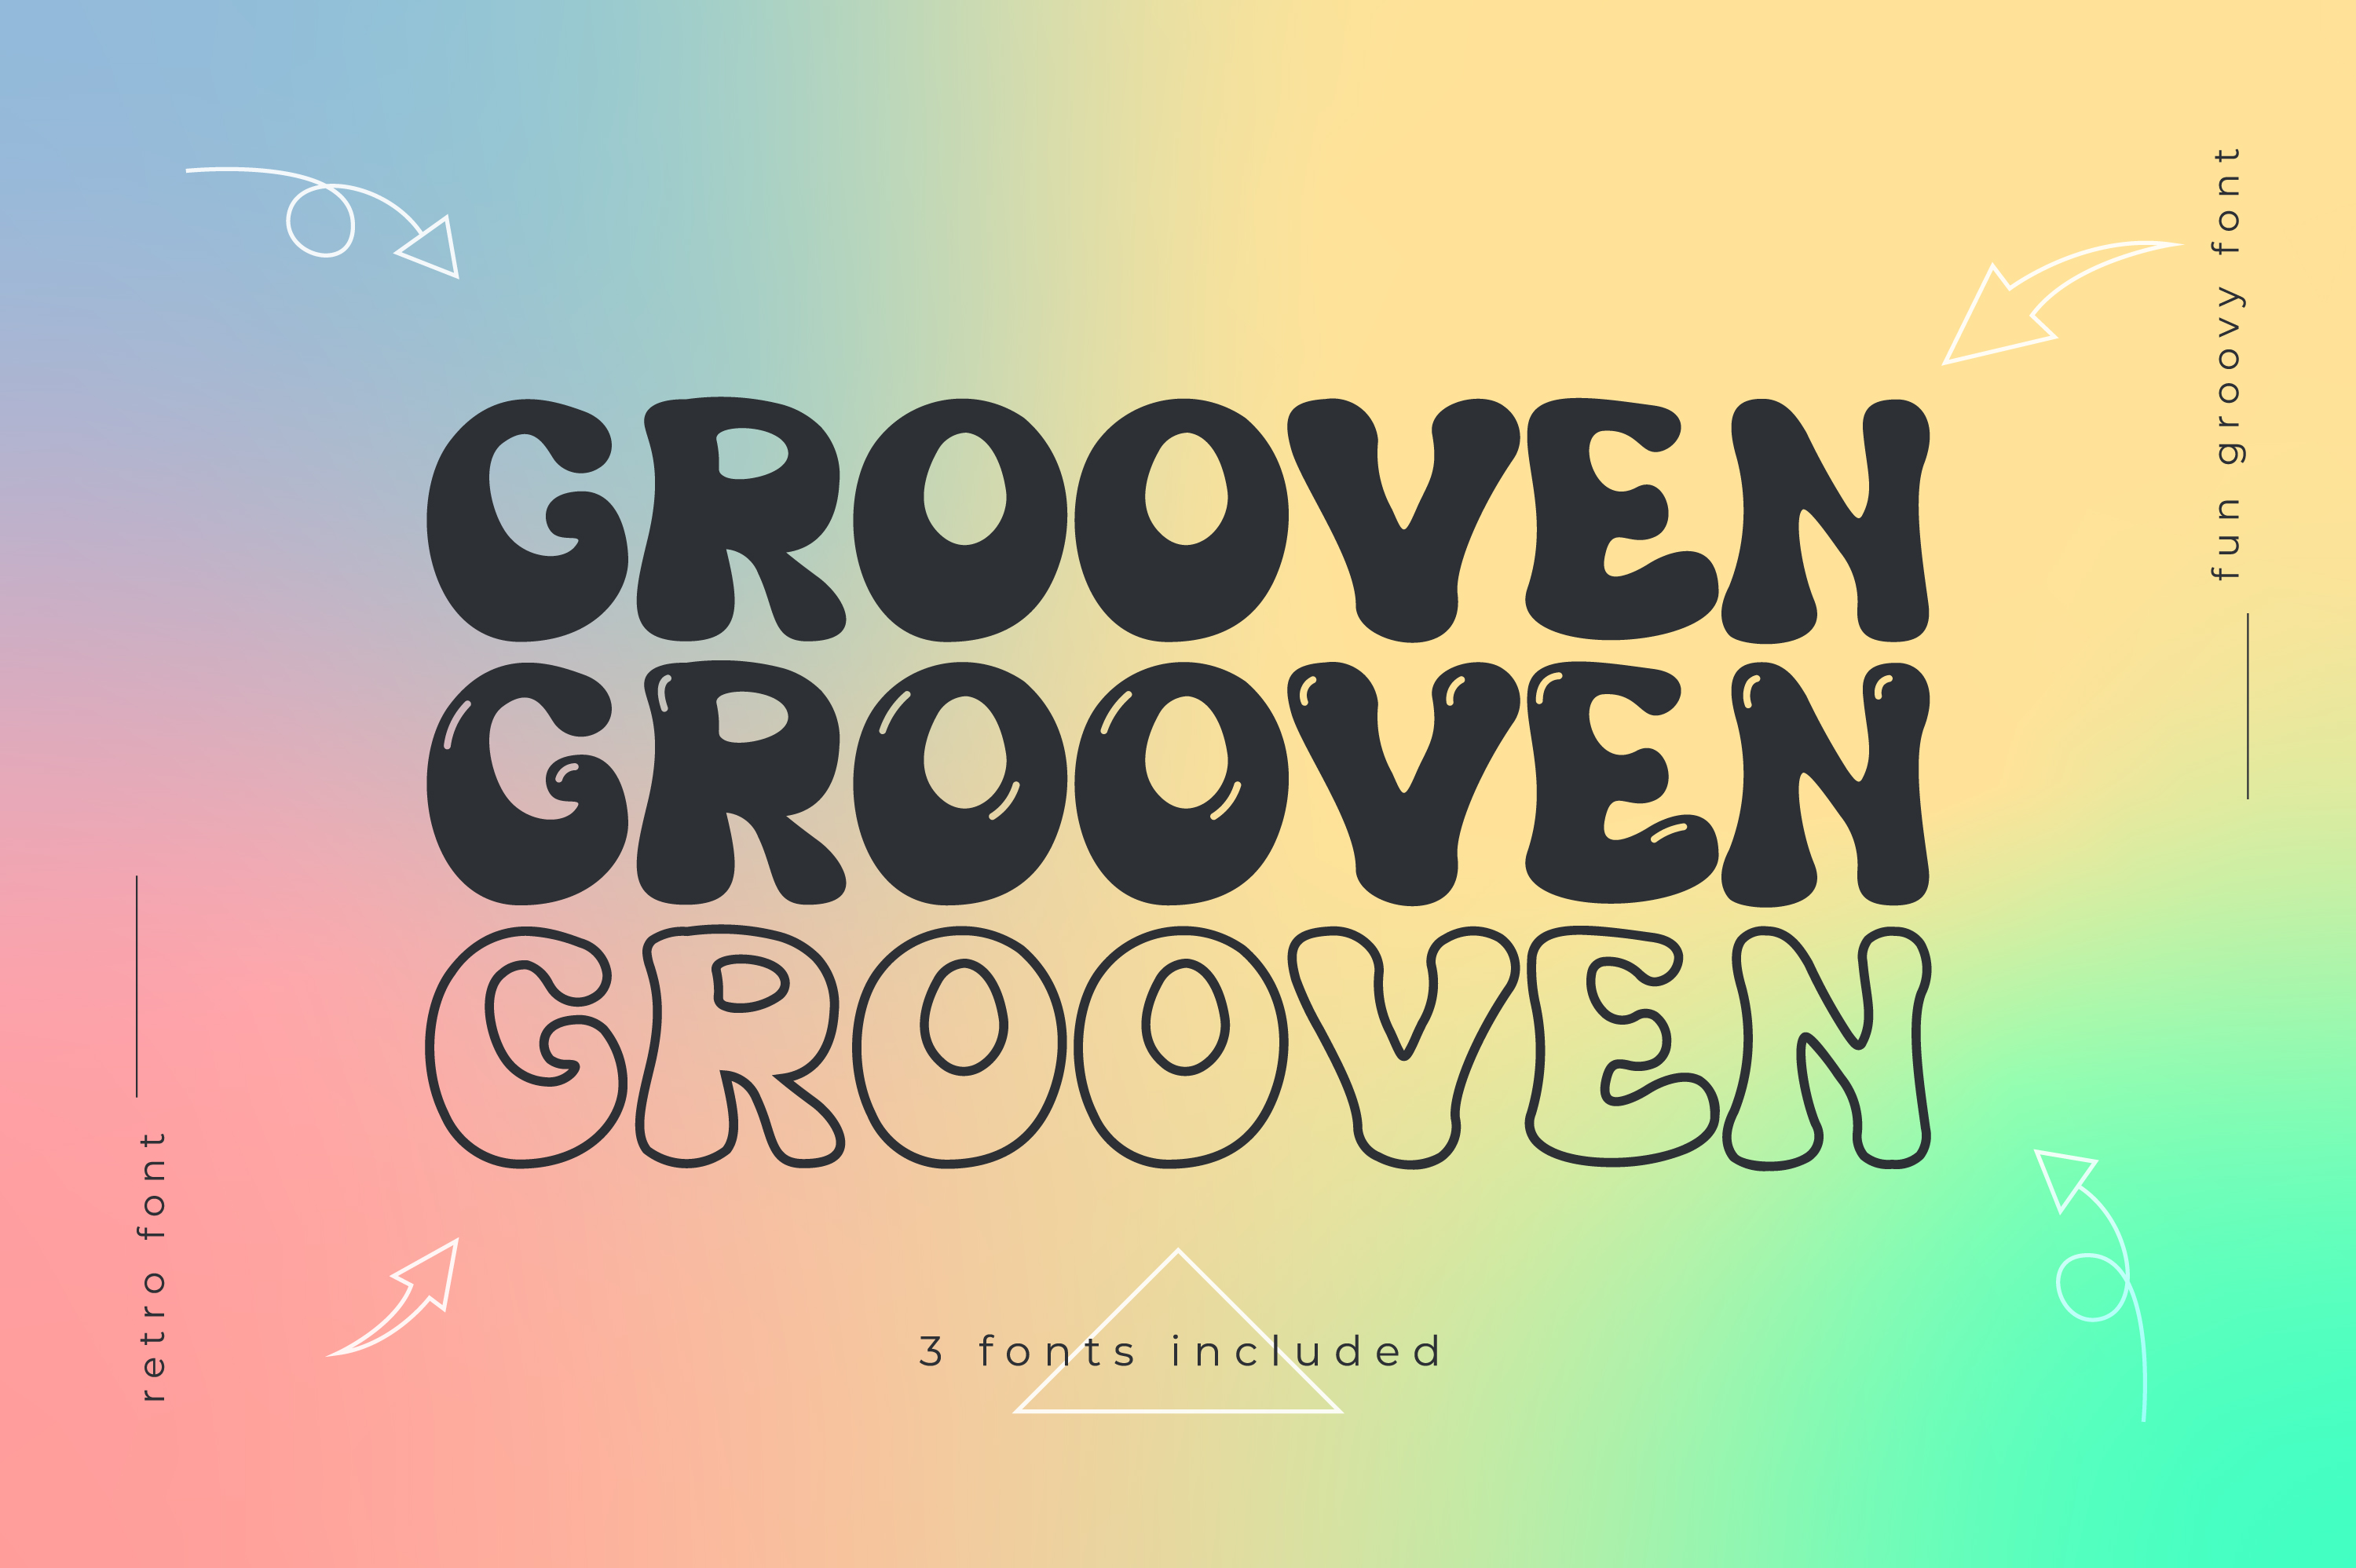 Grooven